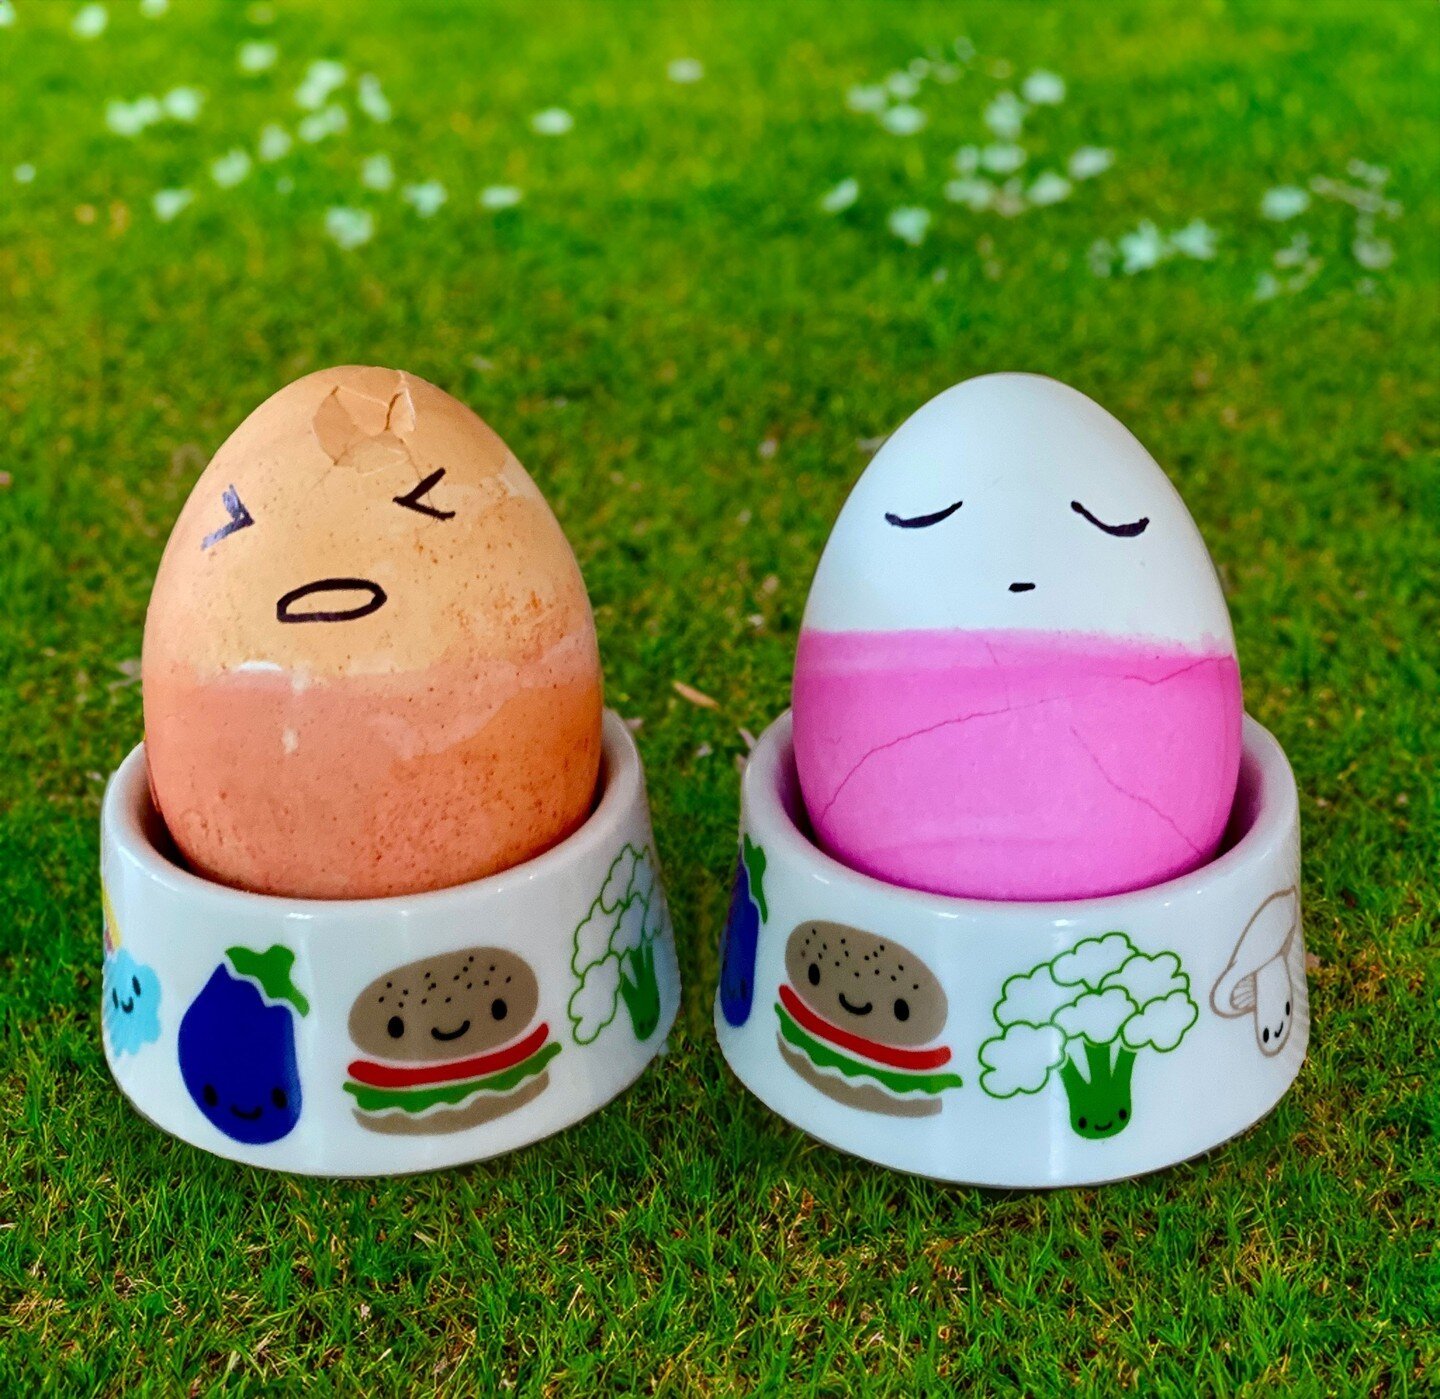 911 Eggmergency! 🥺 🍳⁠
⁠
One moment we're happily dying LuMi eggs, next thing you know one of them falls off the counter and has a major concussion. ⁠
⁠
But, nothing that can&rsquo;t be fixed with a little salt and pepper! 😋 😆⁠
⁠
Enjoy Easter/Pass